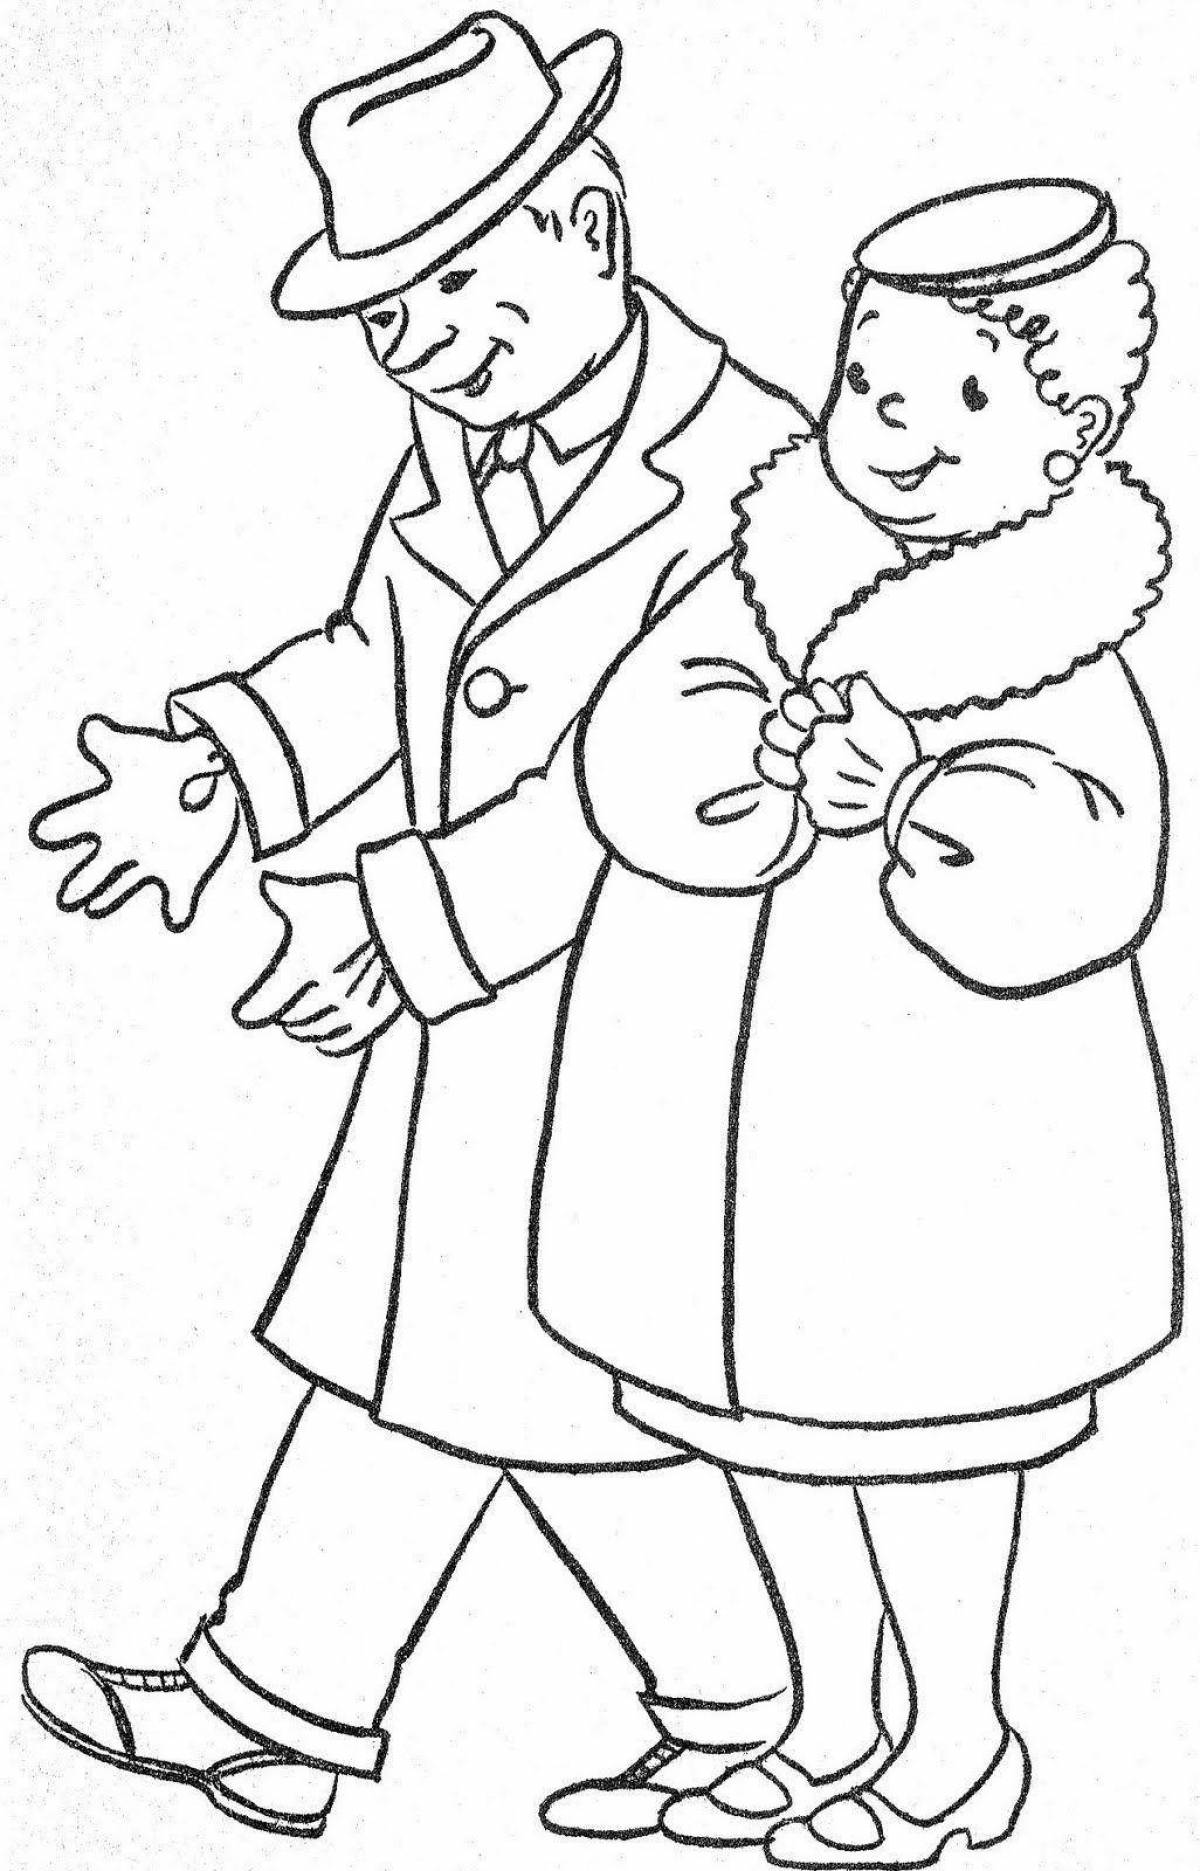 Colorful coloring pages of grandparents for kids